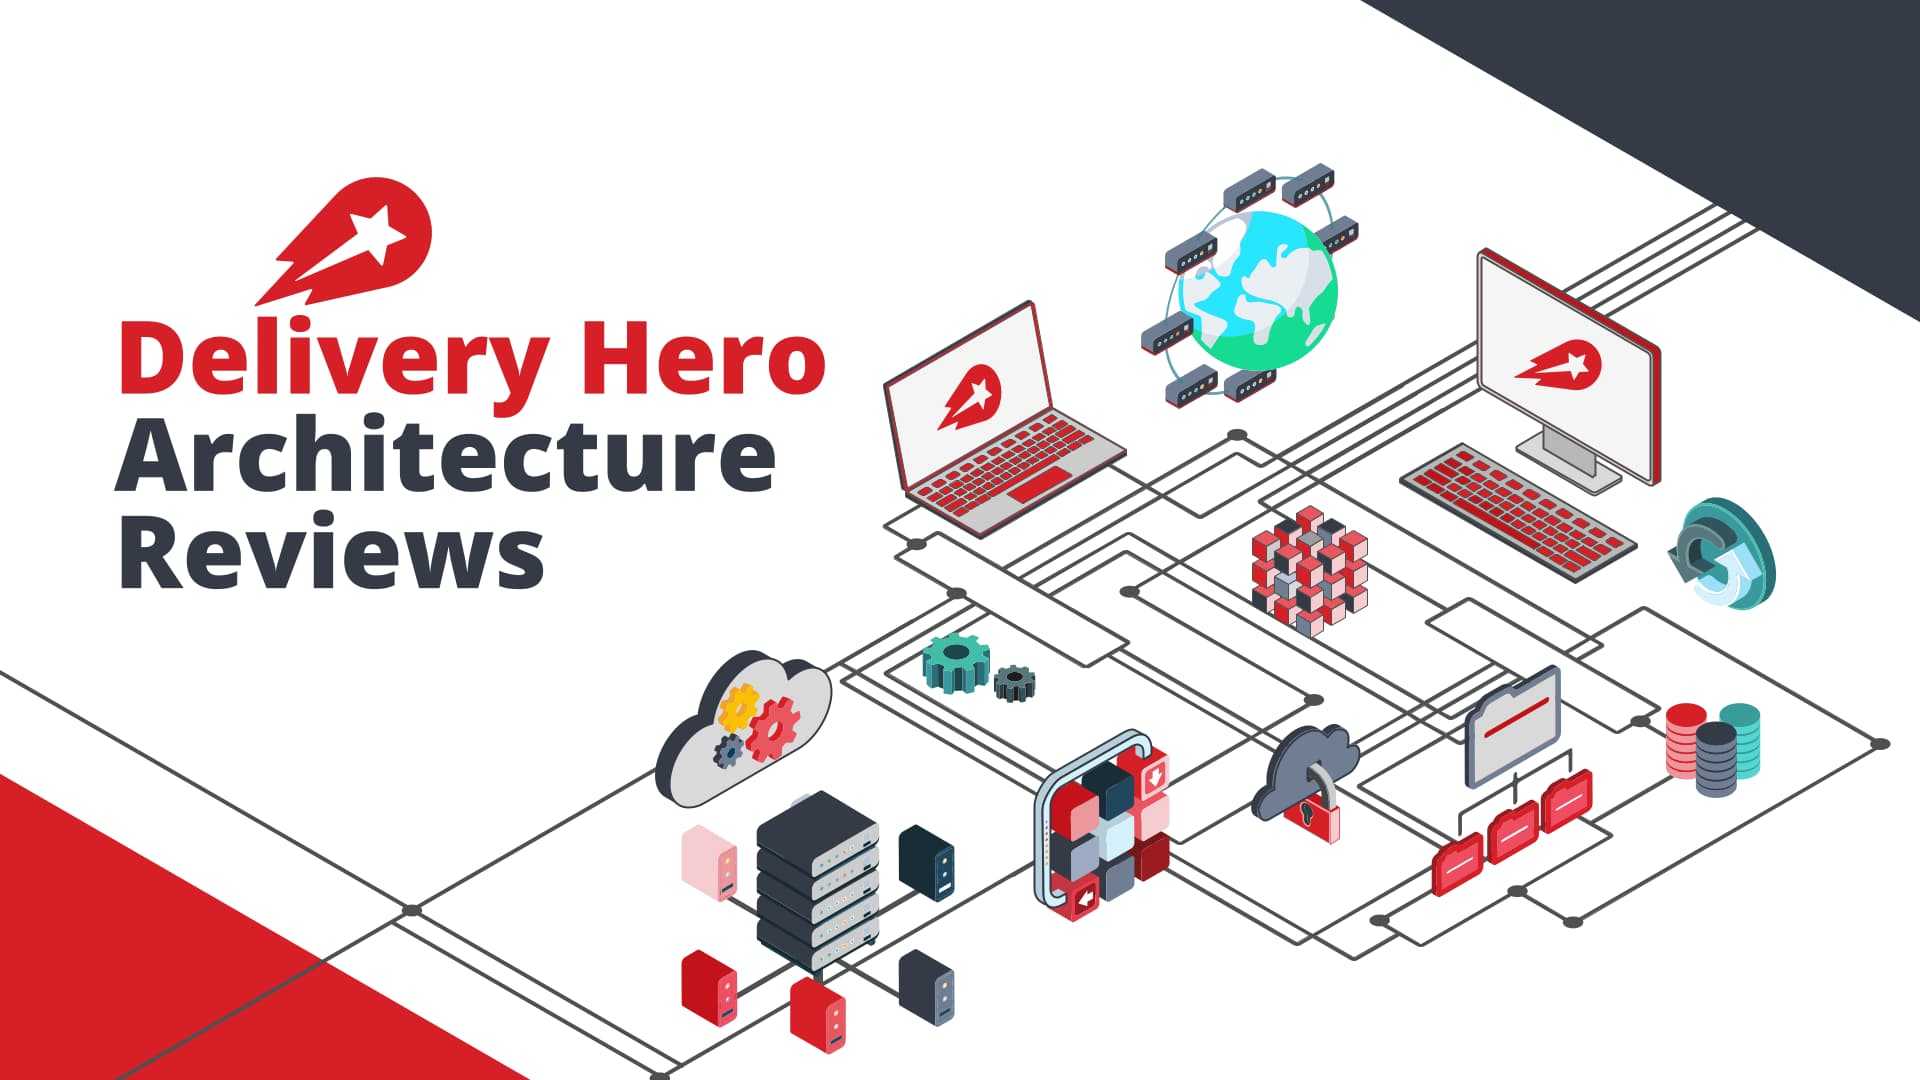 Delivery Hero Architecture Reviews